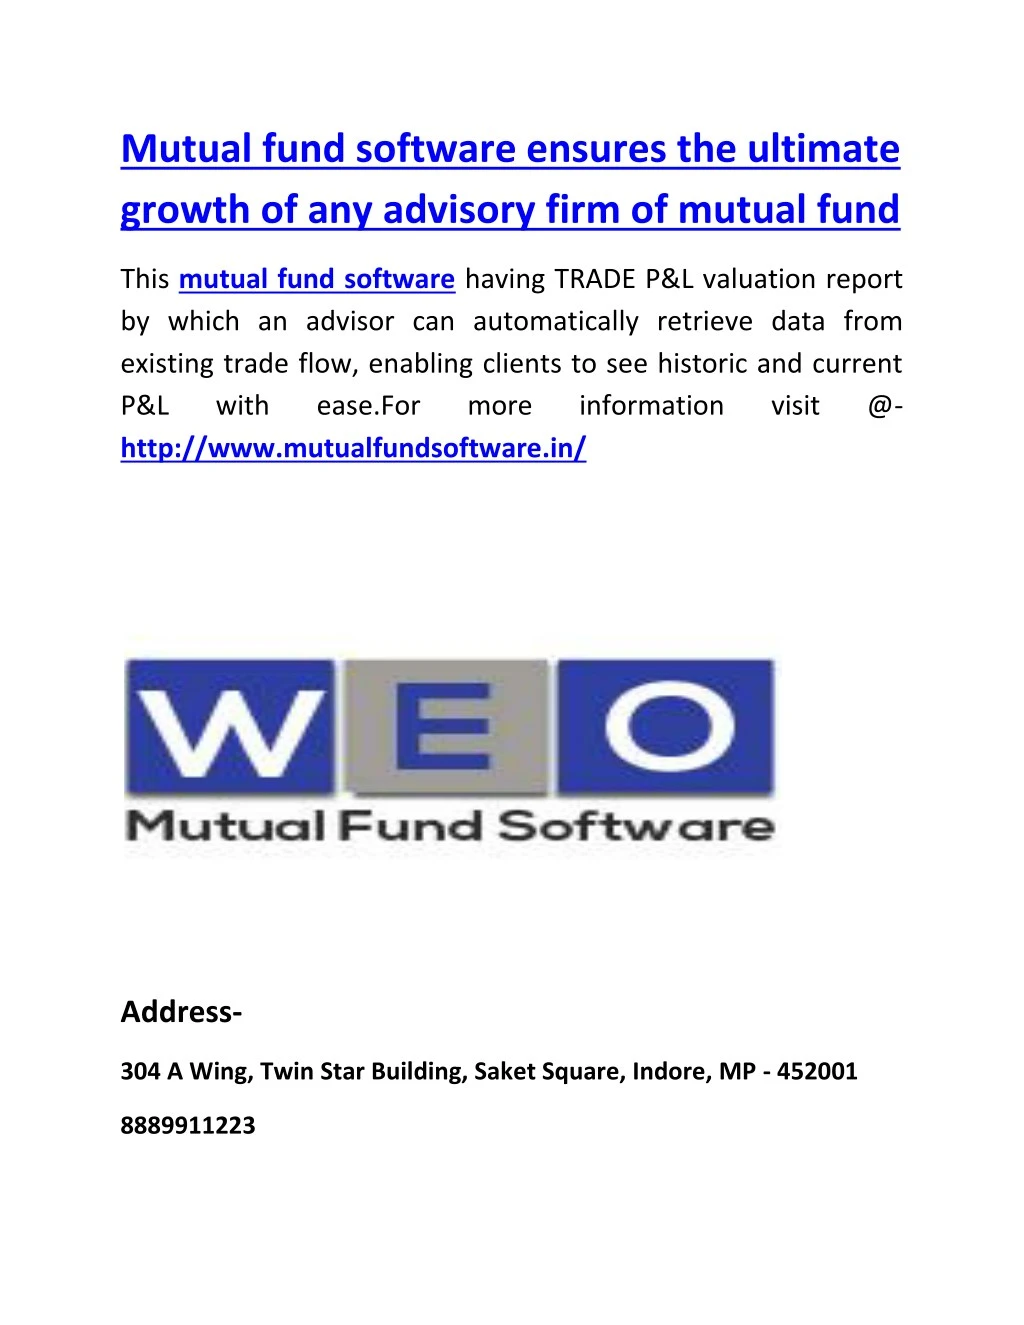 mutual fund software ensures the ultimate growth